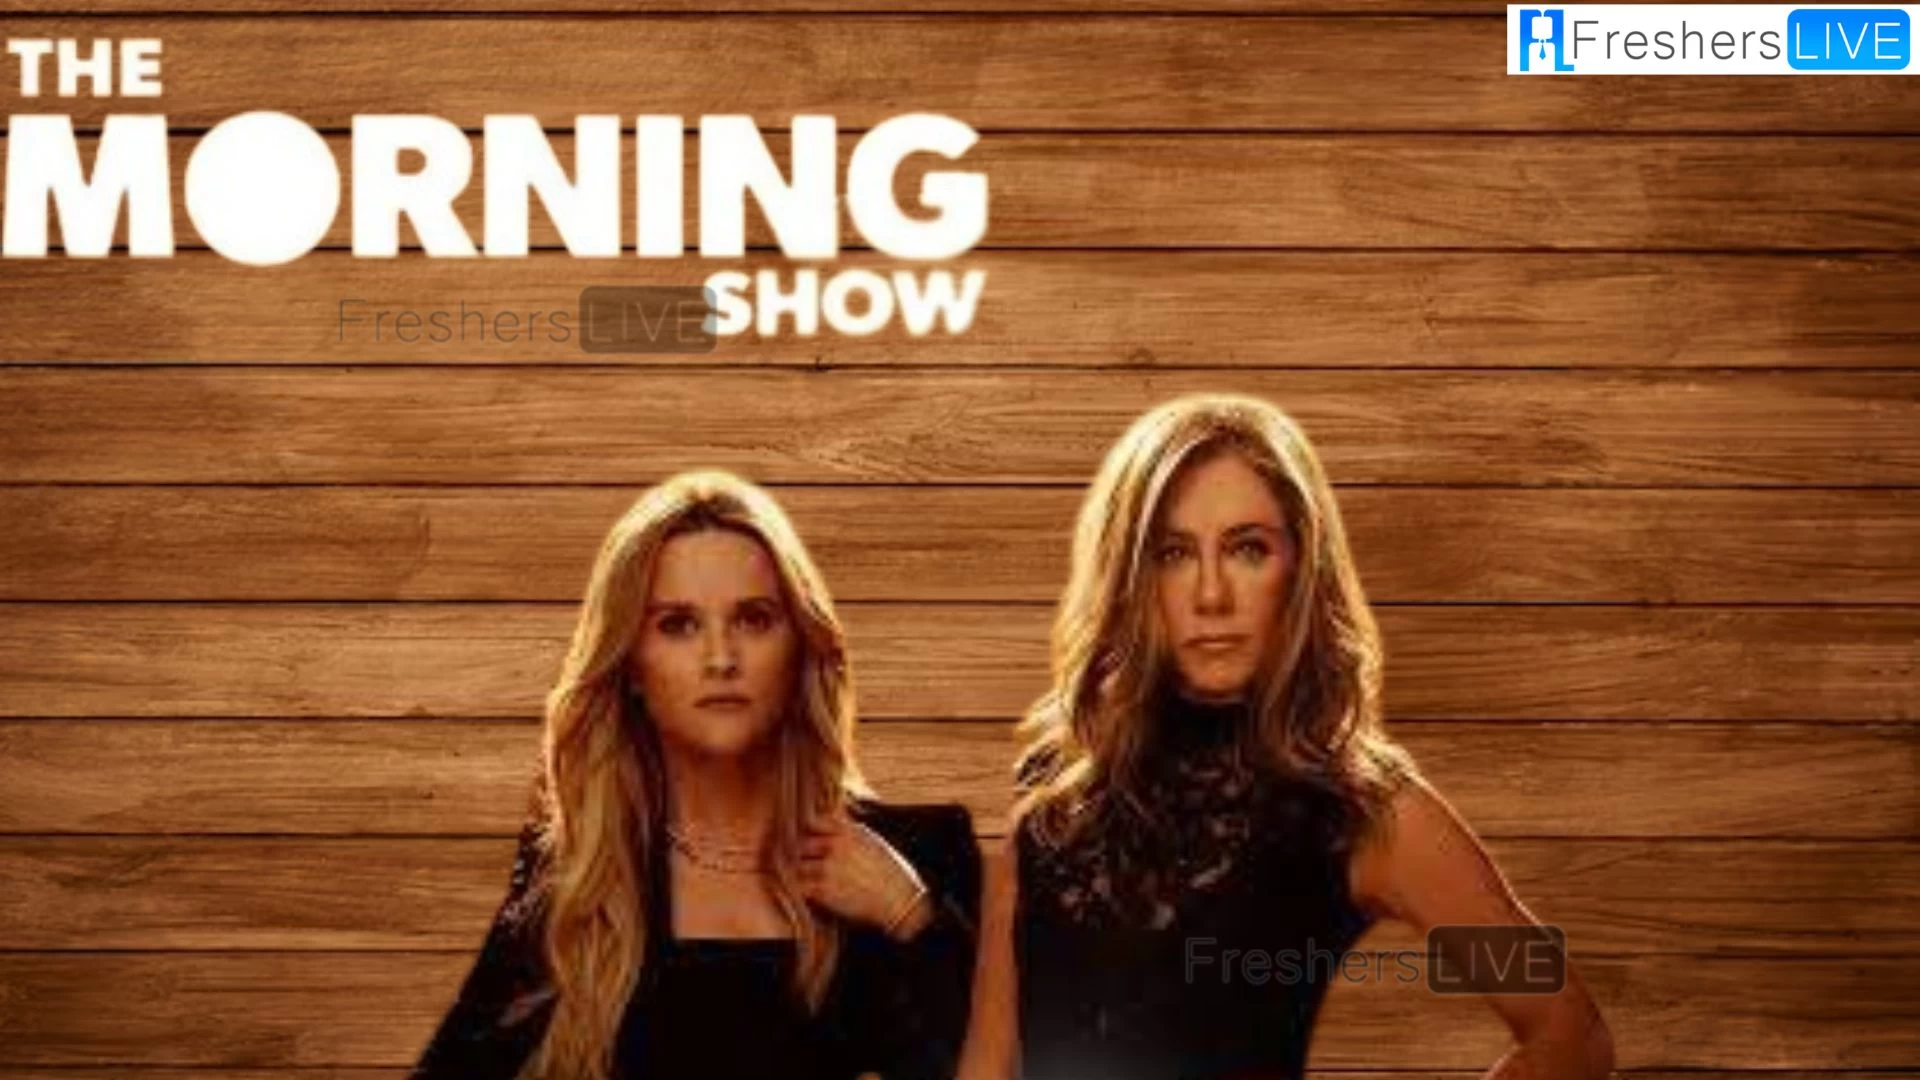 The Morning Show Season 3 Episode 4 Ending Explained, Release Date, Plot, Review, Where to Watch, and more